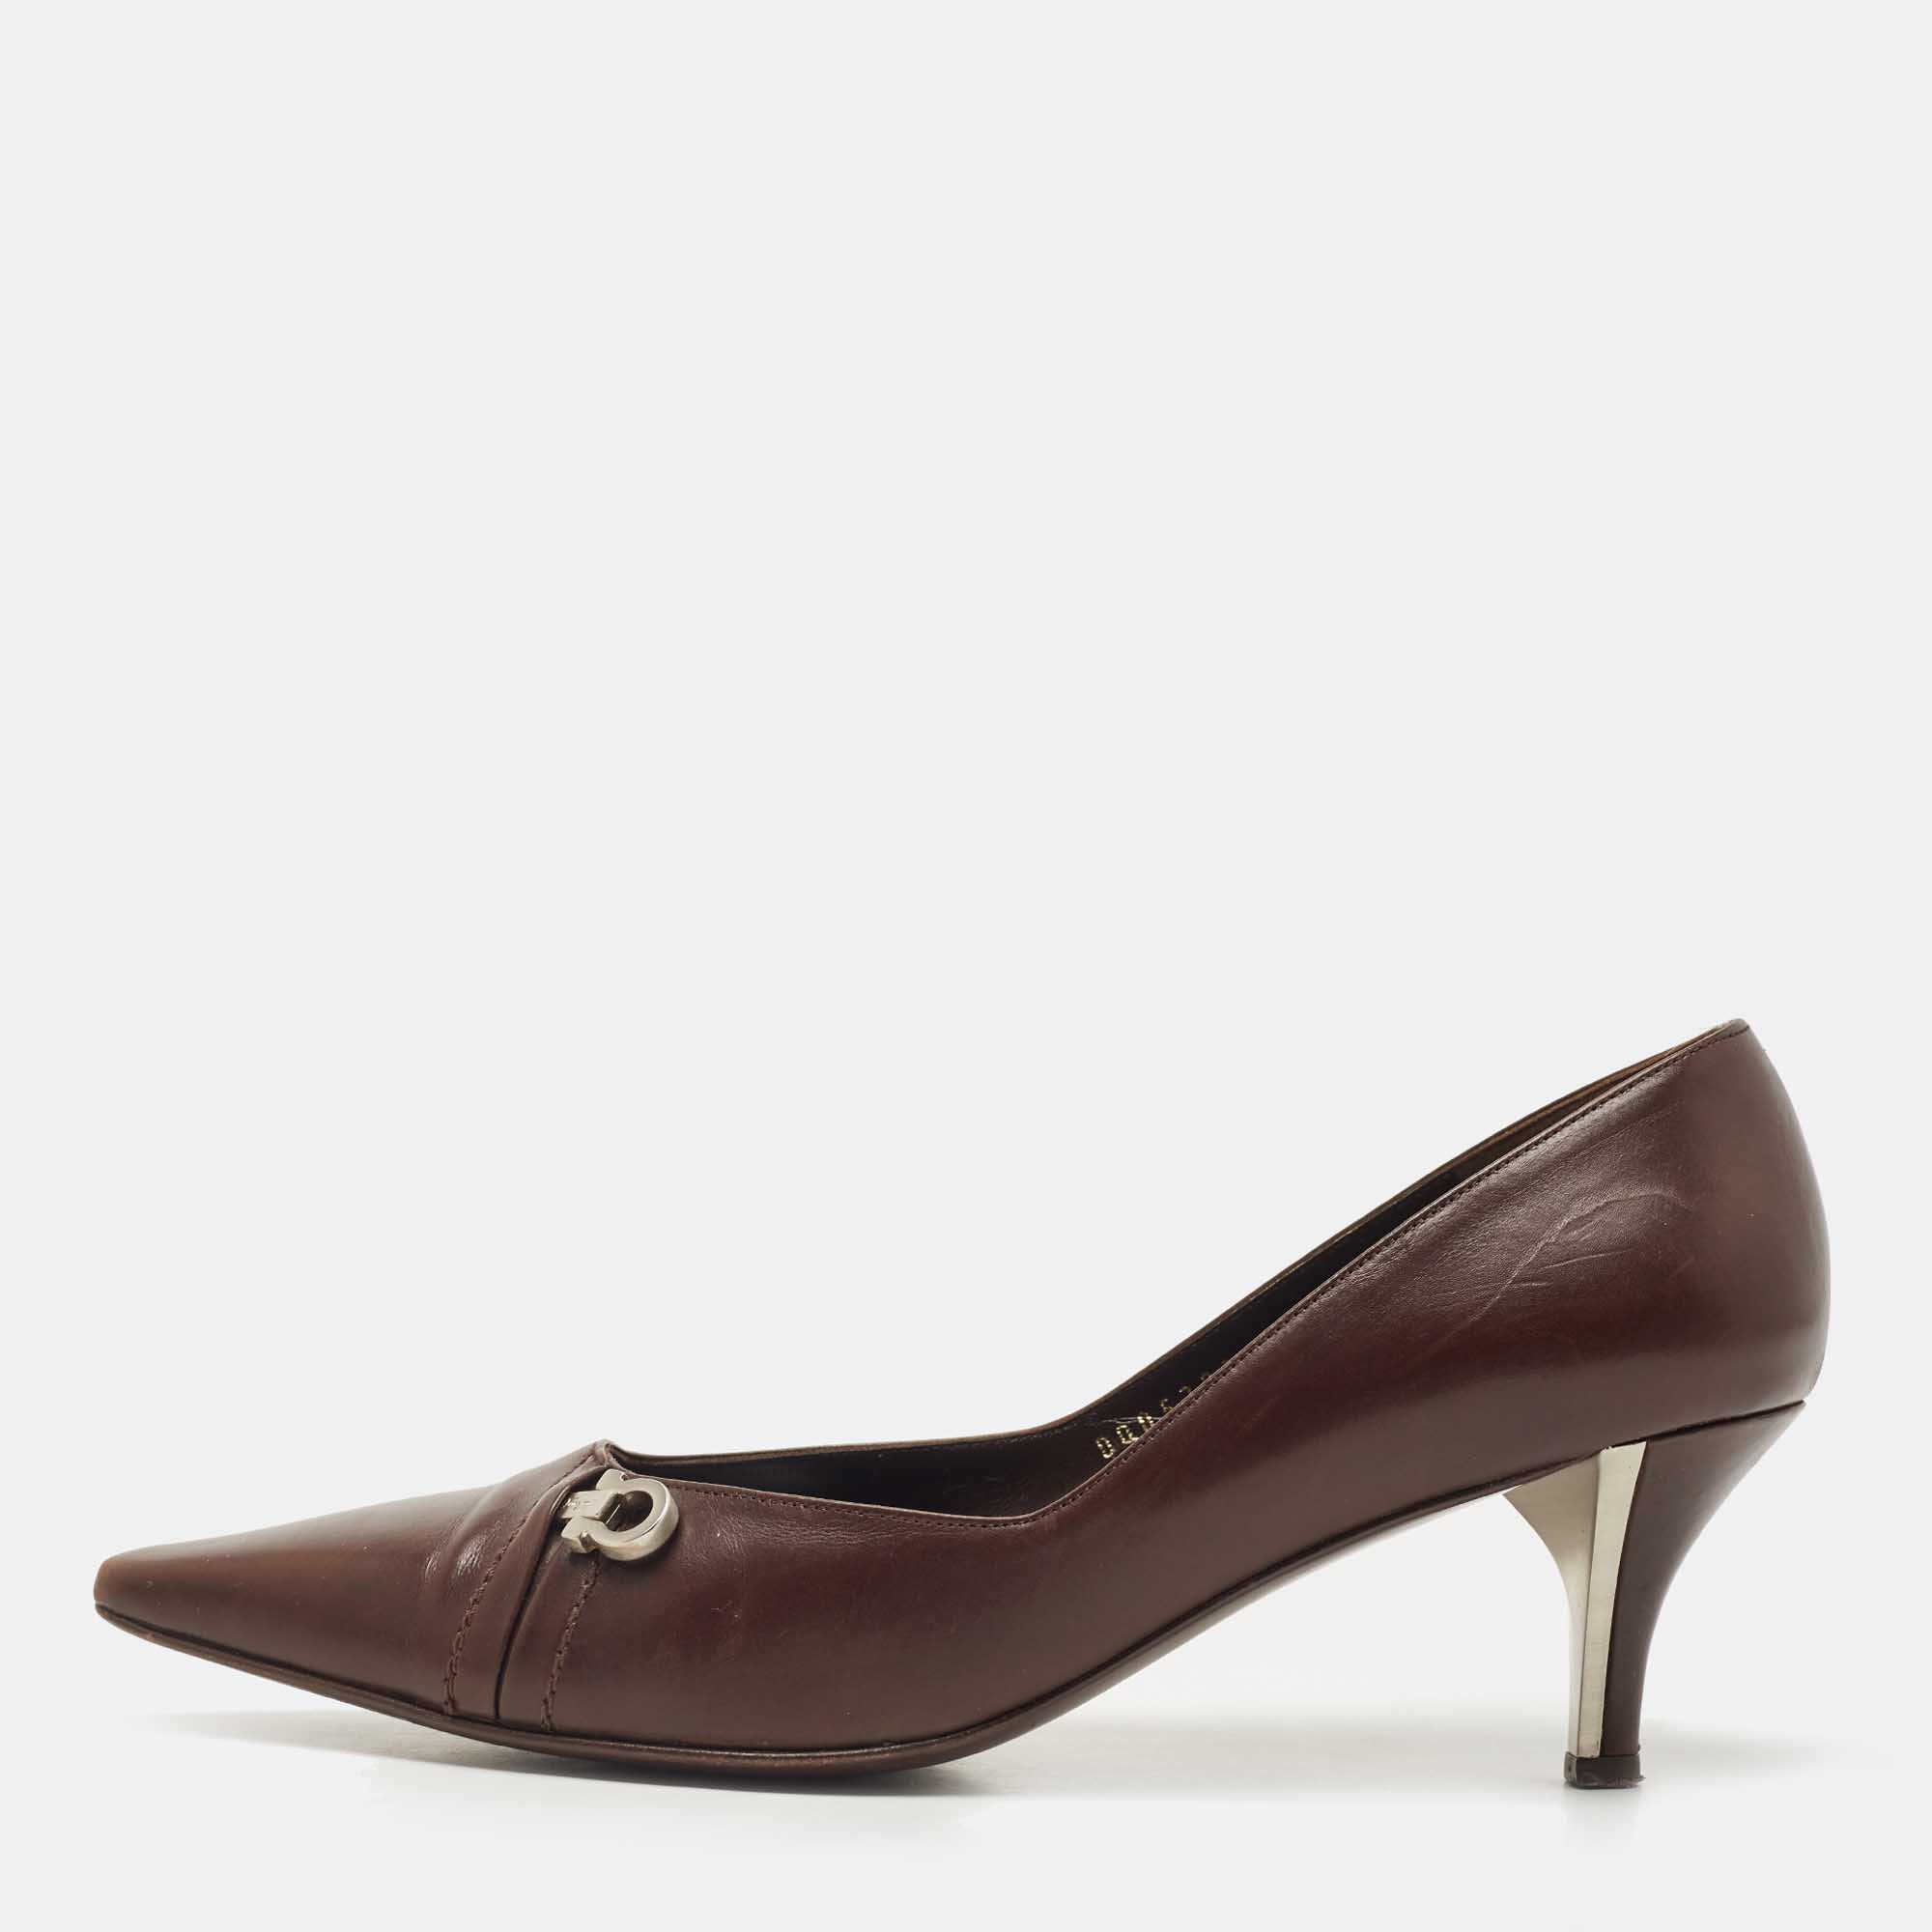 Crafted in leather this pair od Salvatore Ferragamo pumps is detailed with the Gancio buckle on the fronts polished in silver tone hardware and feature finely drawn stitching. This pair comes with leather lined insoles that carry brand labeling and are elevated on 6.5cm heels. Structured with a notable sense of casual outings or professional meets.